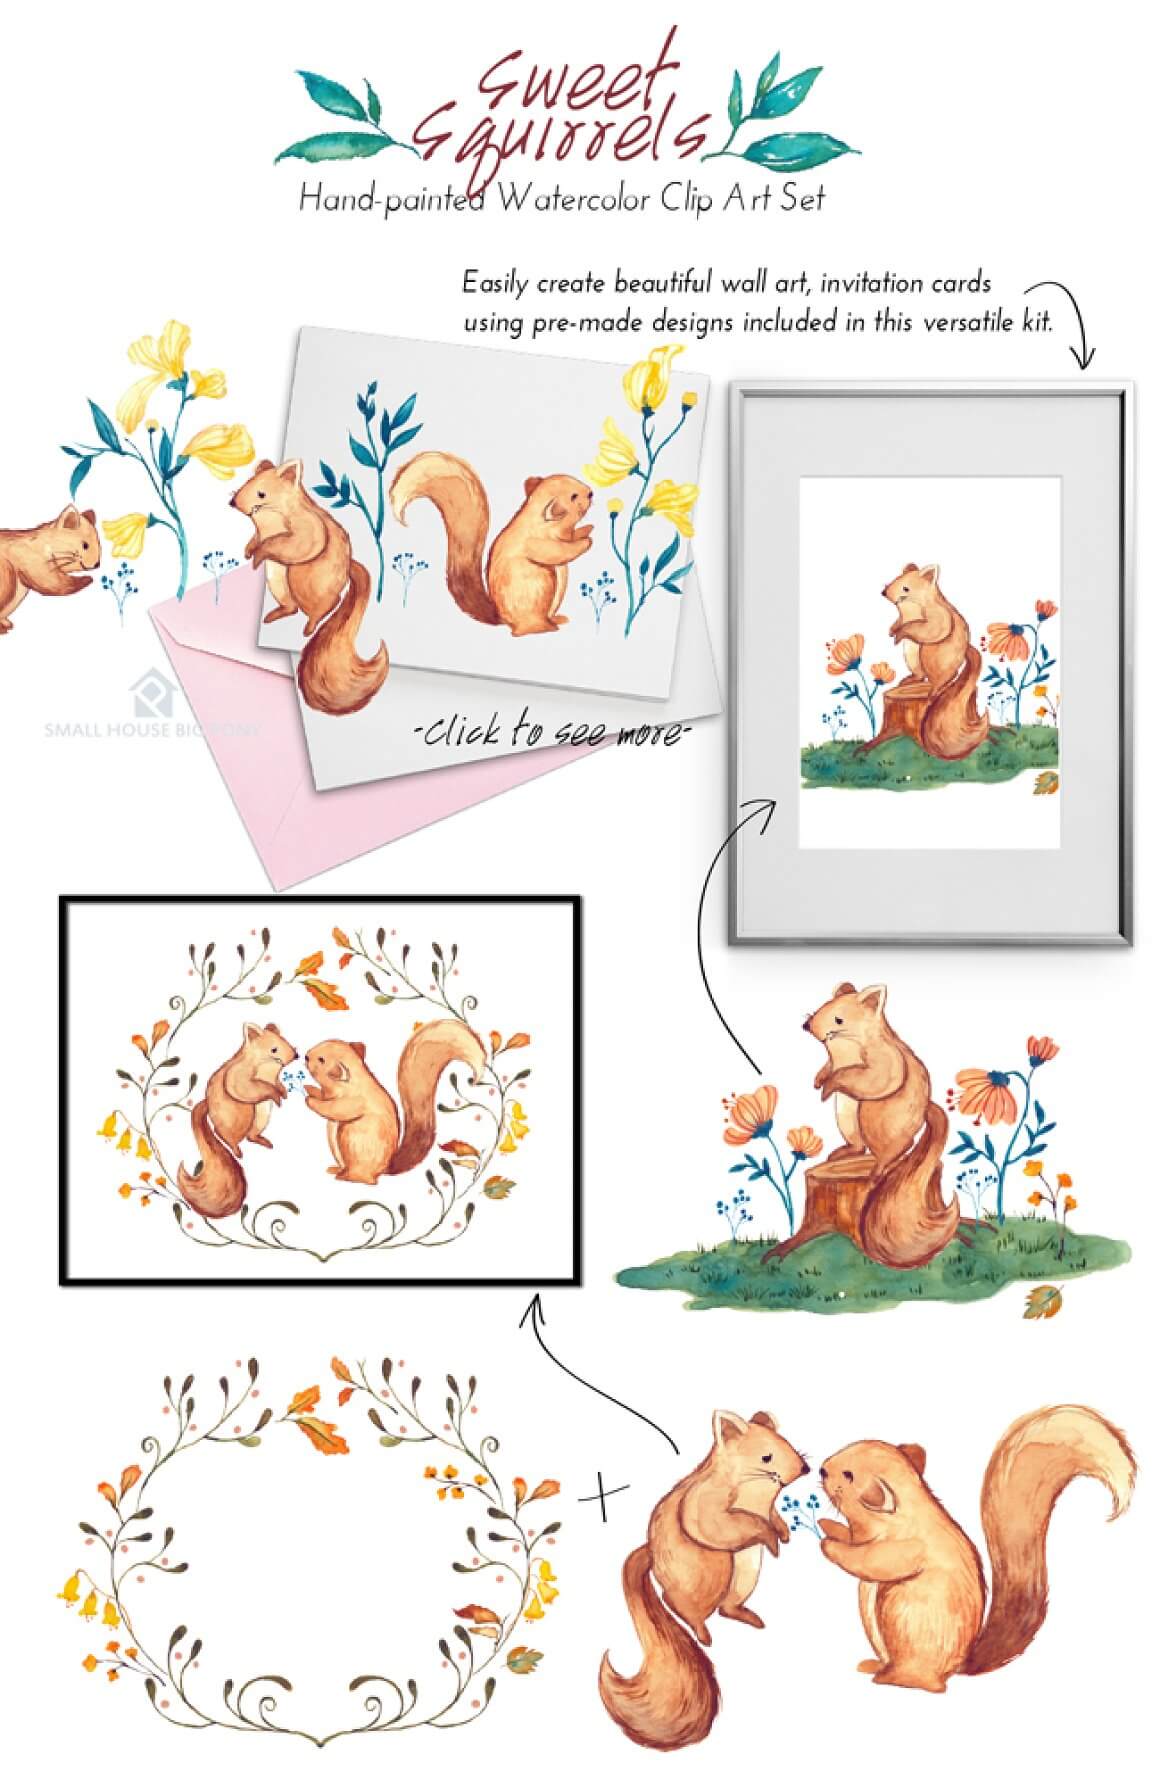 Possibility to create any design of drawing with the help of separately drawn elements of squirrels, vegetable frames, flowers.